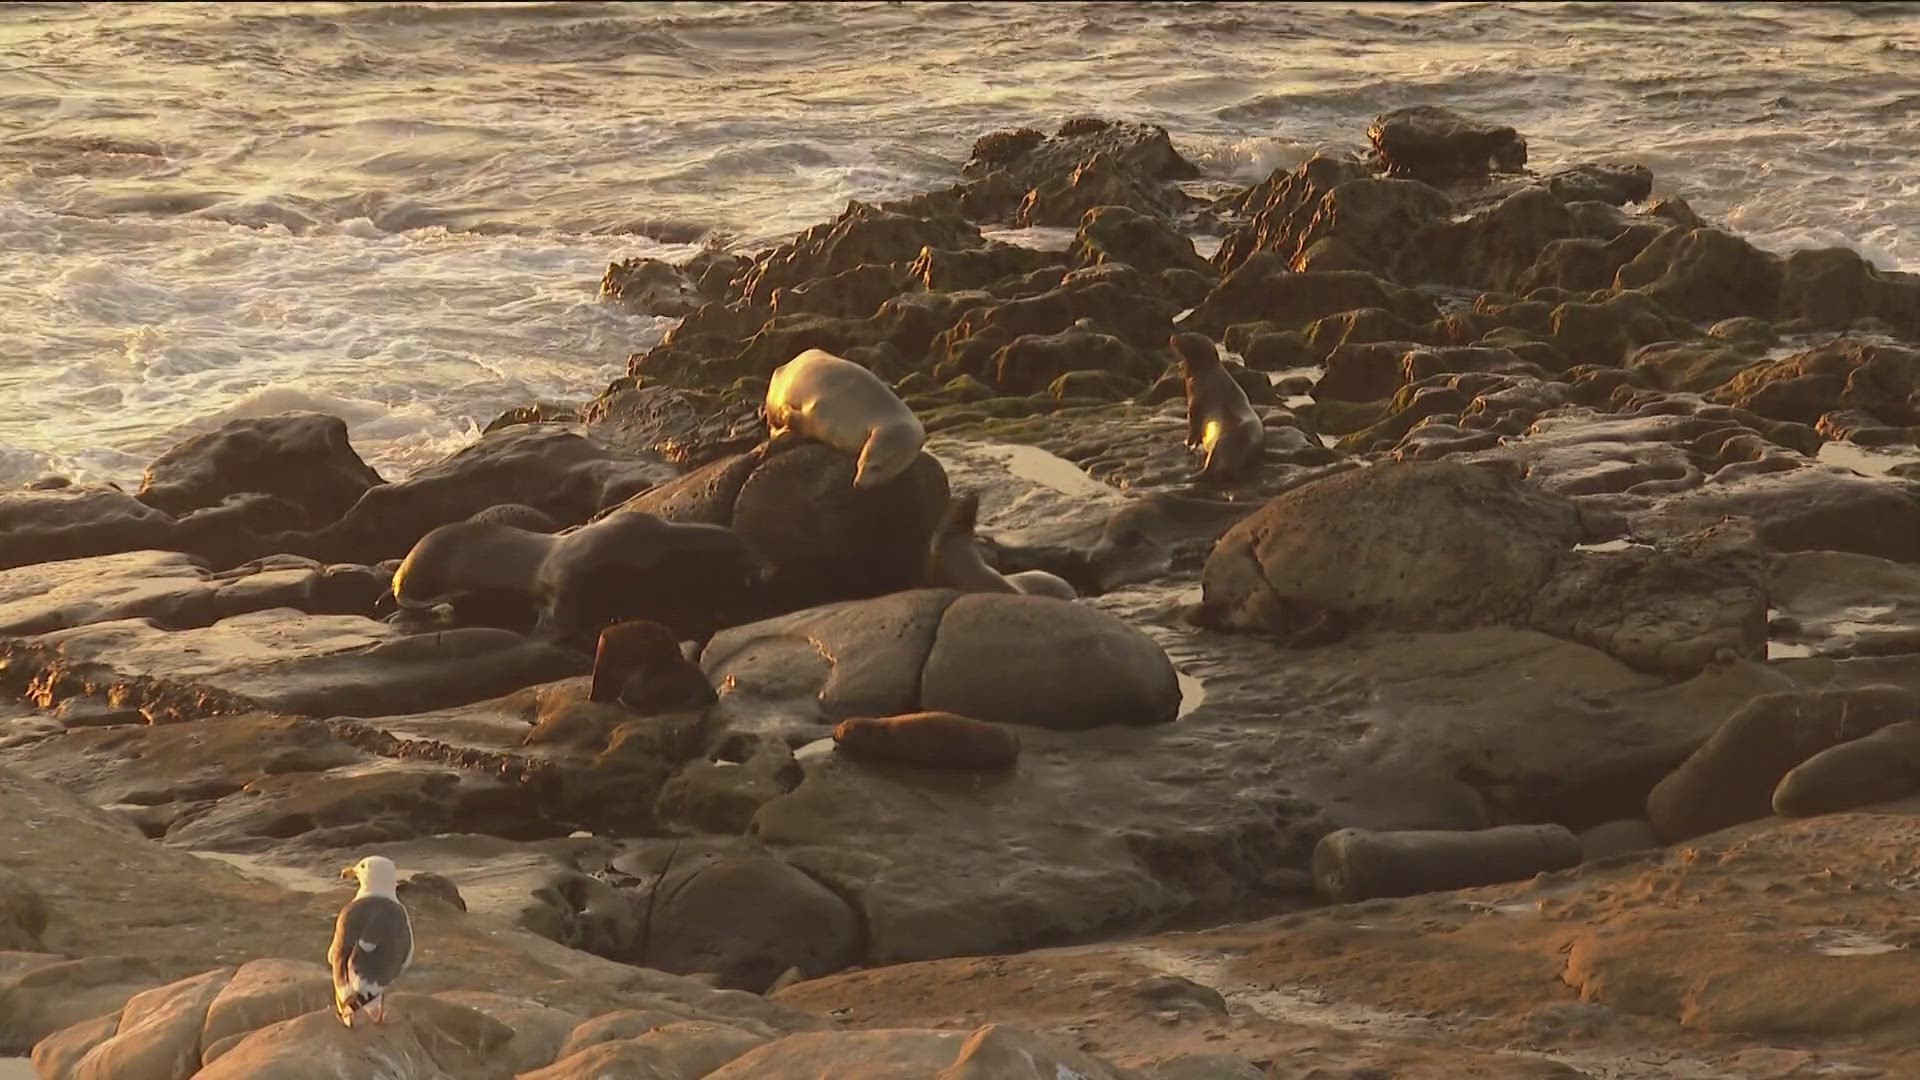 Point La Jolla between La Jolla Cove and Boomer Beach is a popular resting place for sea lions. San Diego considers closure due to reports of harassment from public.